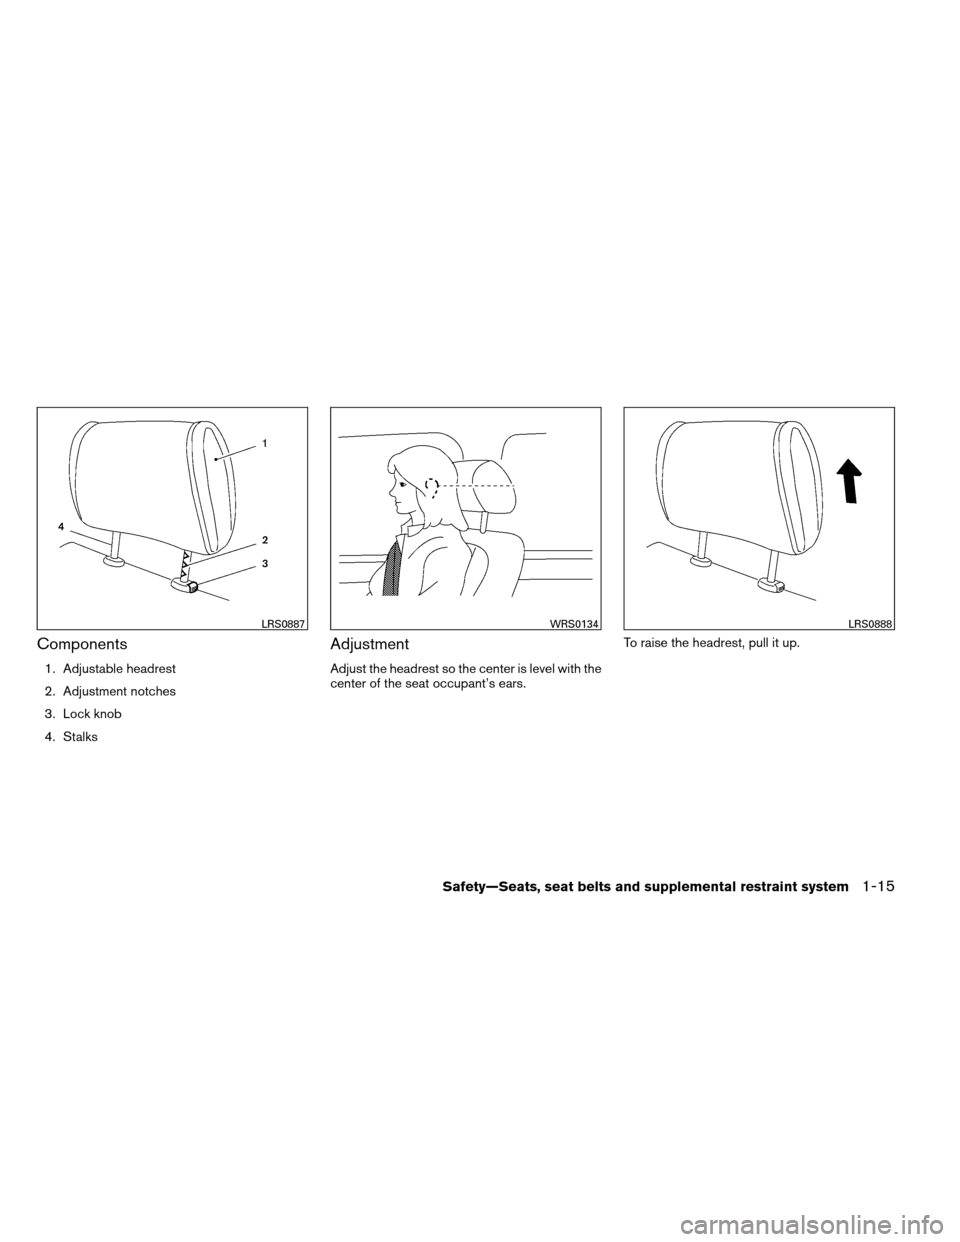 NISSAN ARMADA 2012 1.G Owners Manual Components
1. Adjustable headrest
2. Adjustment notches
3. Lock knob
4. Stalks
Adjustment
Adjust the headrest so the center is level with the
center of the seat occupant’s ears.To raise the headrest